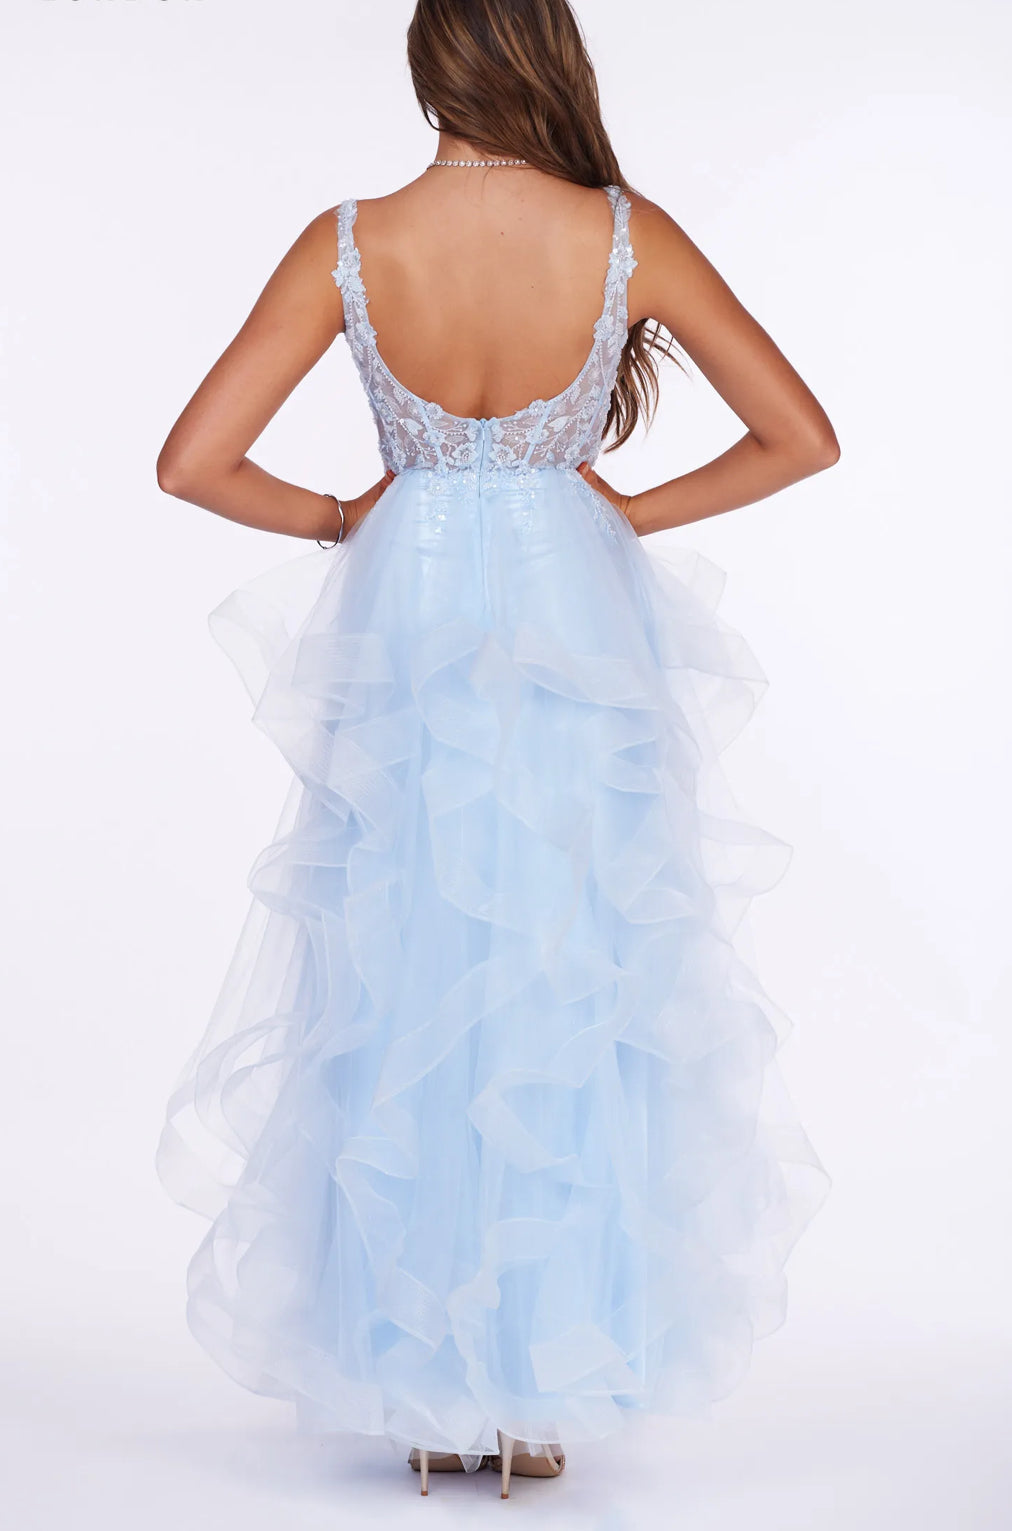 Tulle Dress - Coco